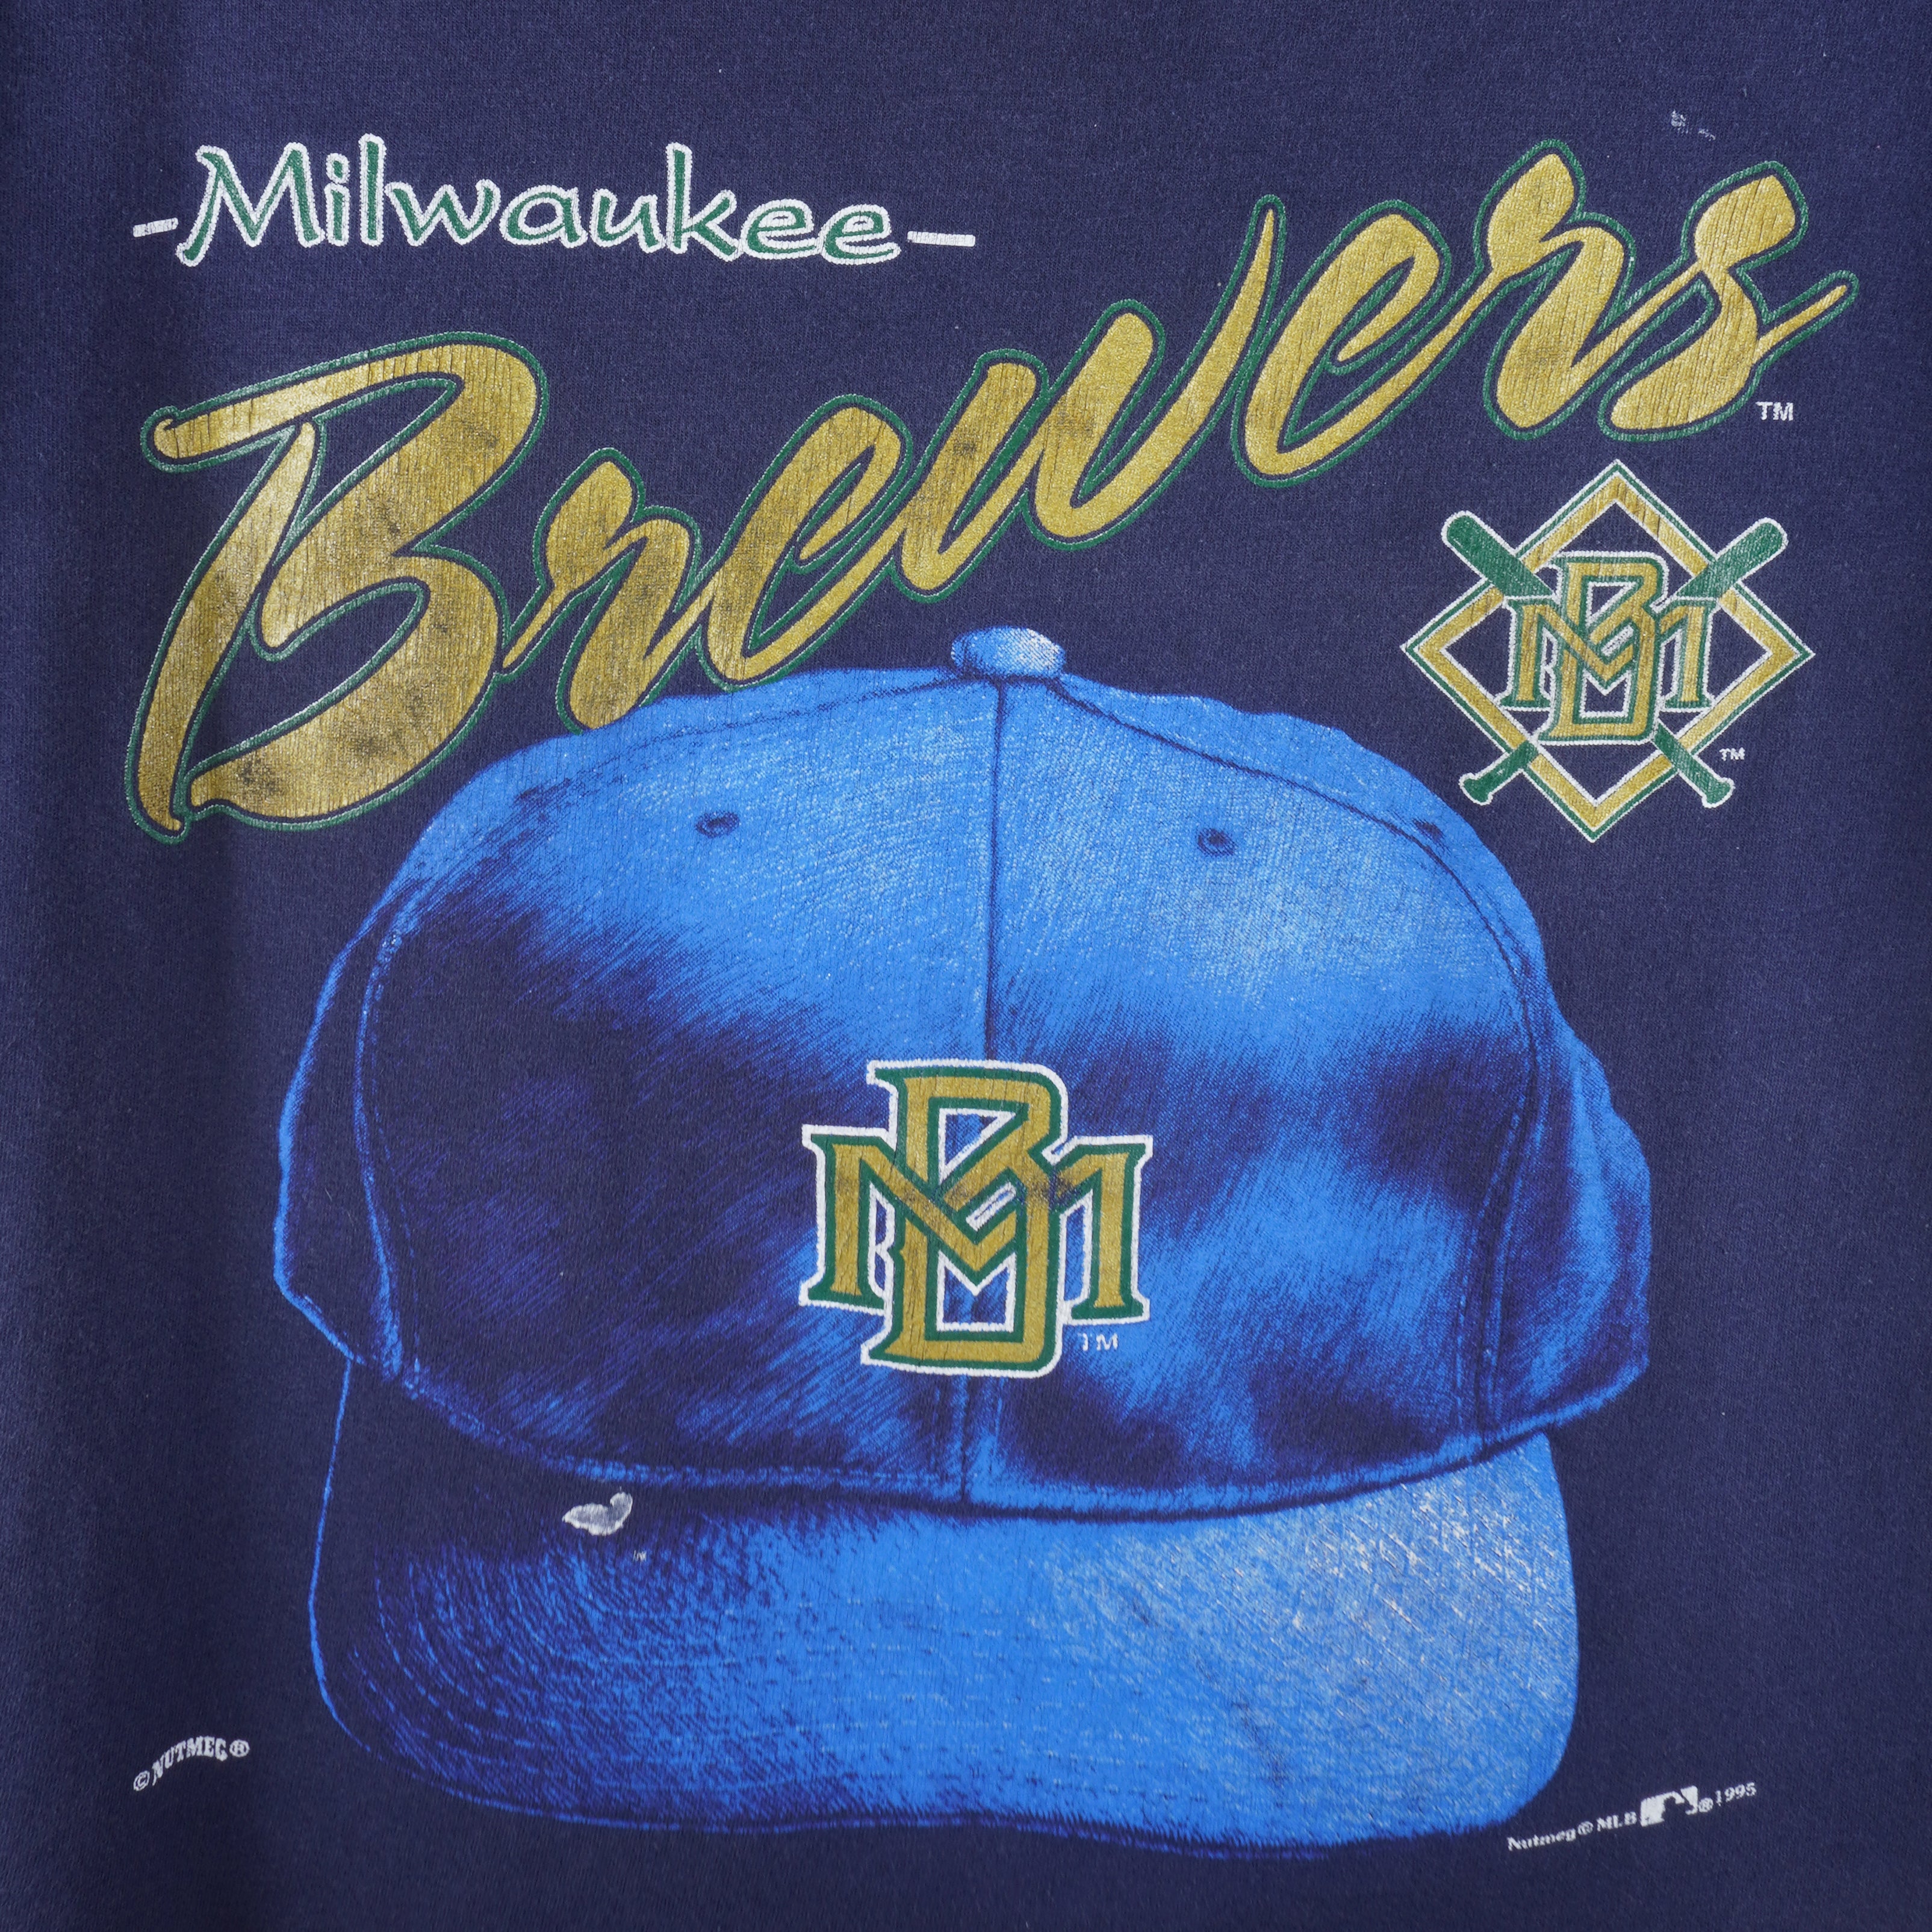 Brewers Jersey ~ MLB Stitches Athletic Gear~ Size Medium Blue